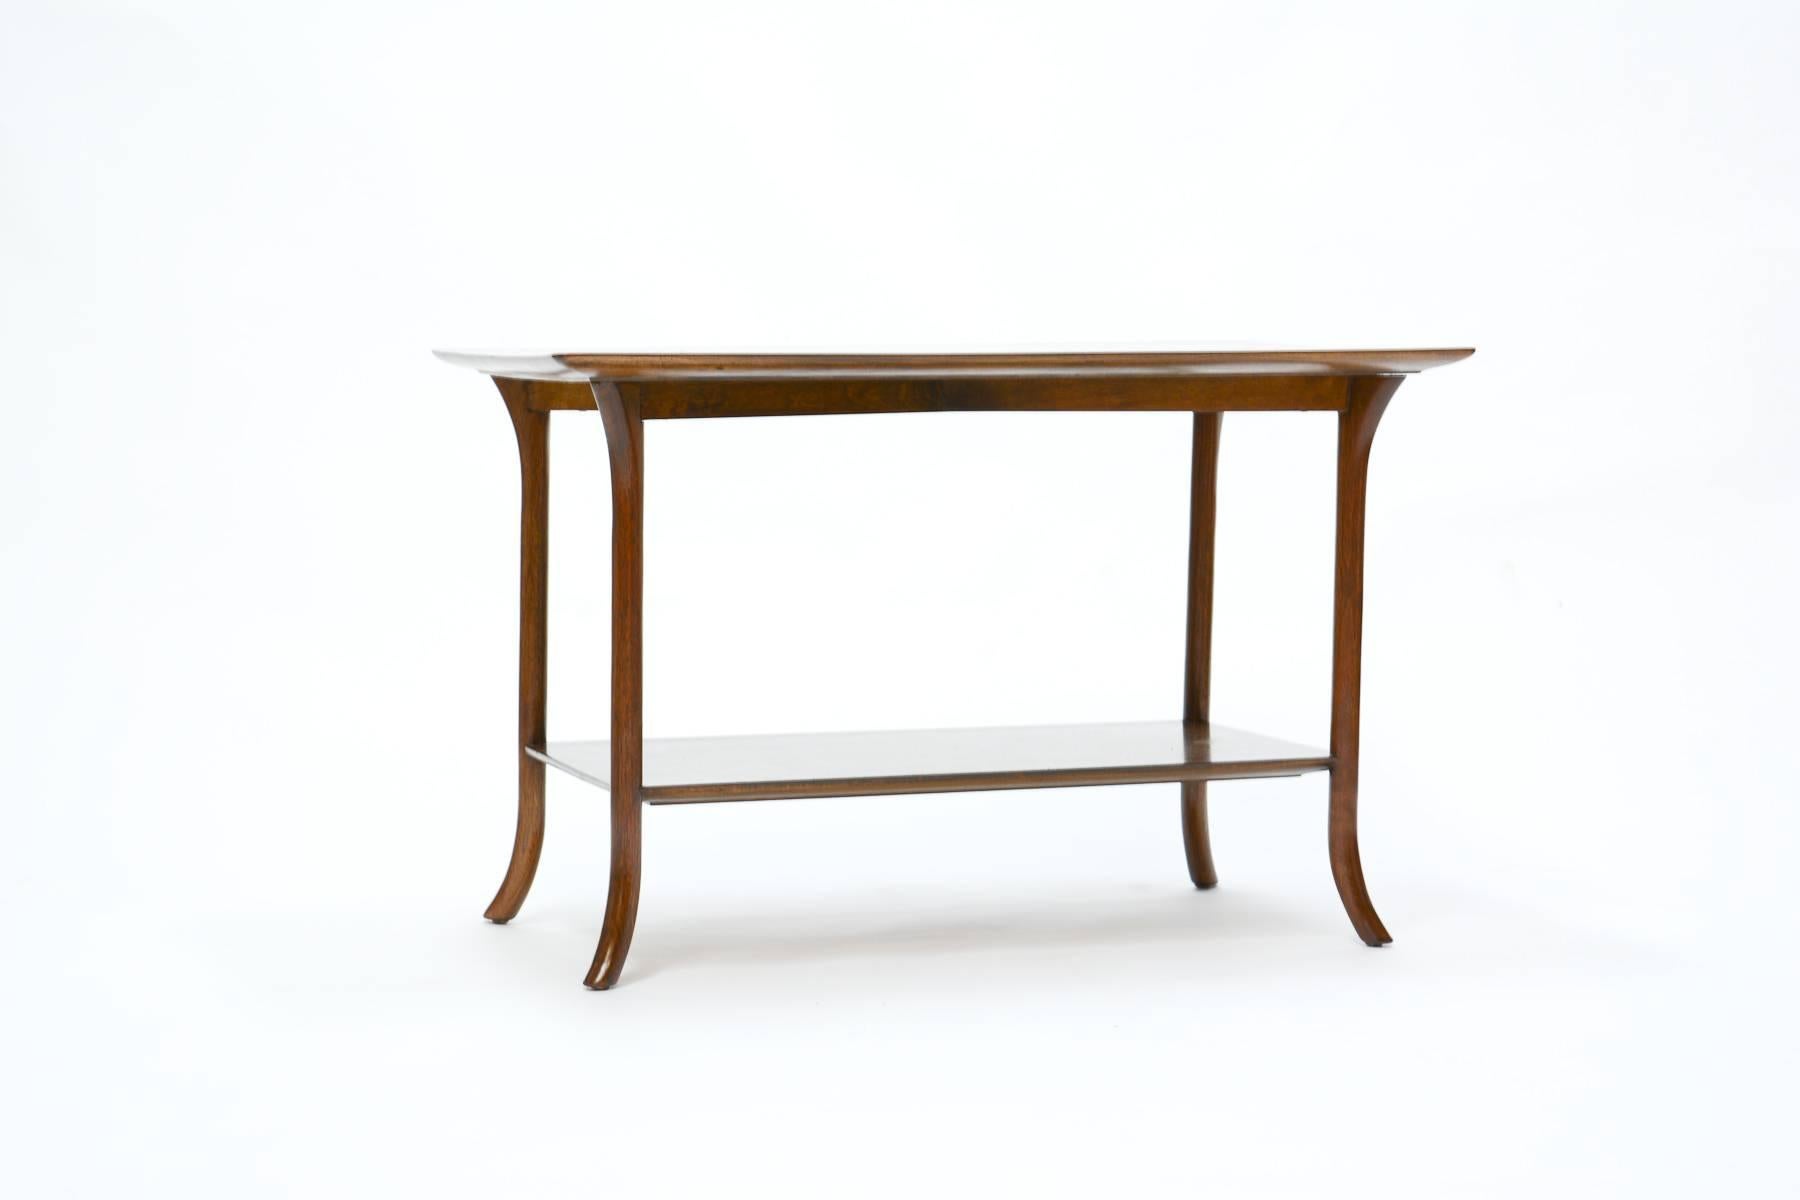 A T. H. Robsjohn-Gibbings side table for Widdicomb with crossed-veneer top.

A Classic example of Robsjohn-Gibbings' elegant Mid-Century design, incorporating simple lines found in nature and a fondness and preservation of natural materials.

T.